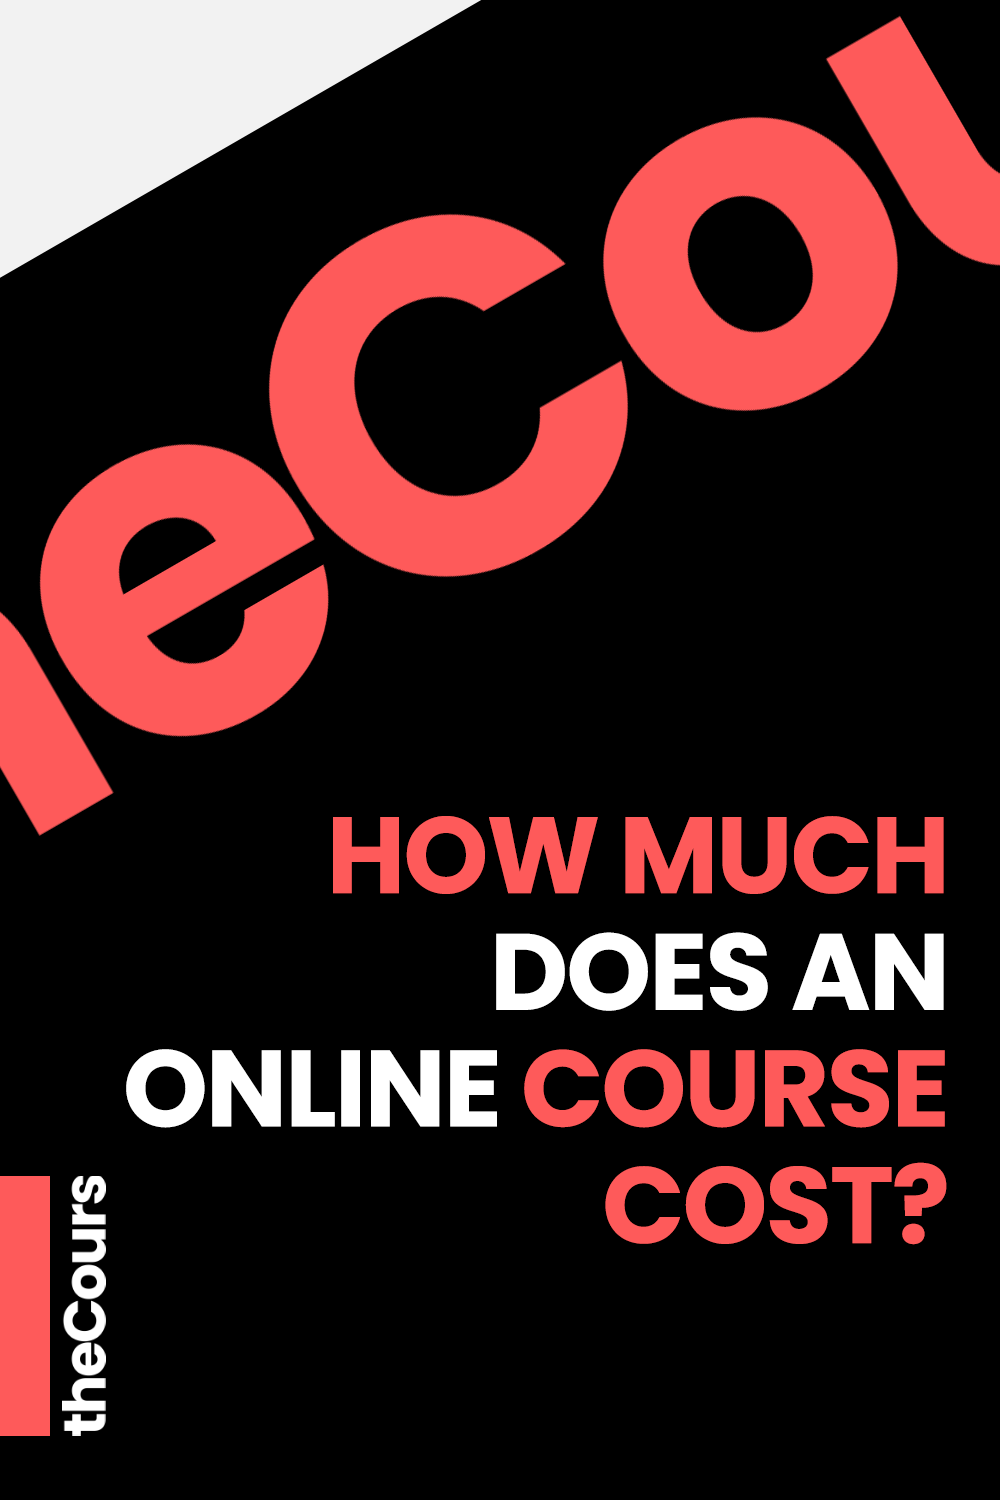 How Much Does An Online Course Cost?